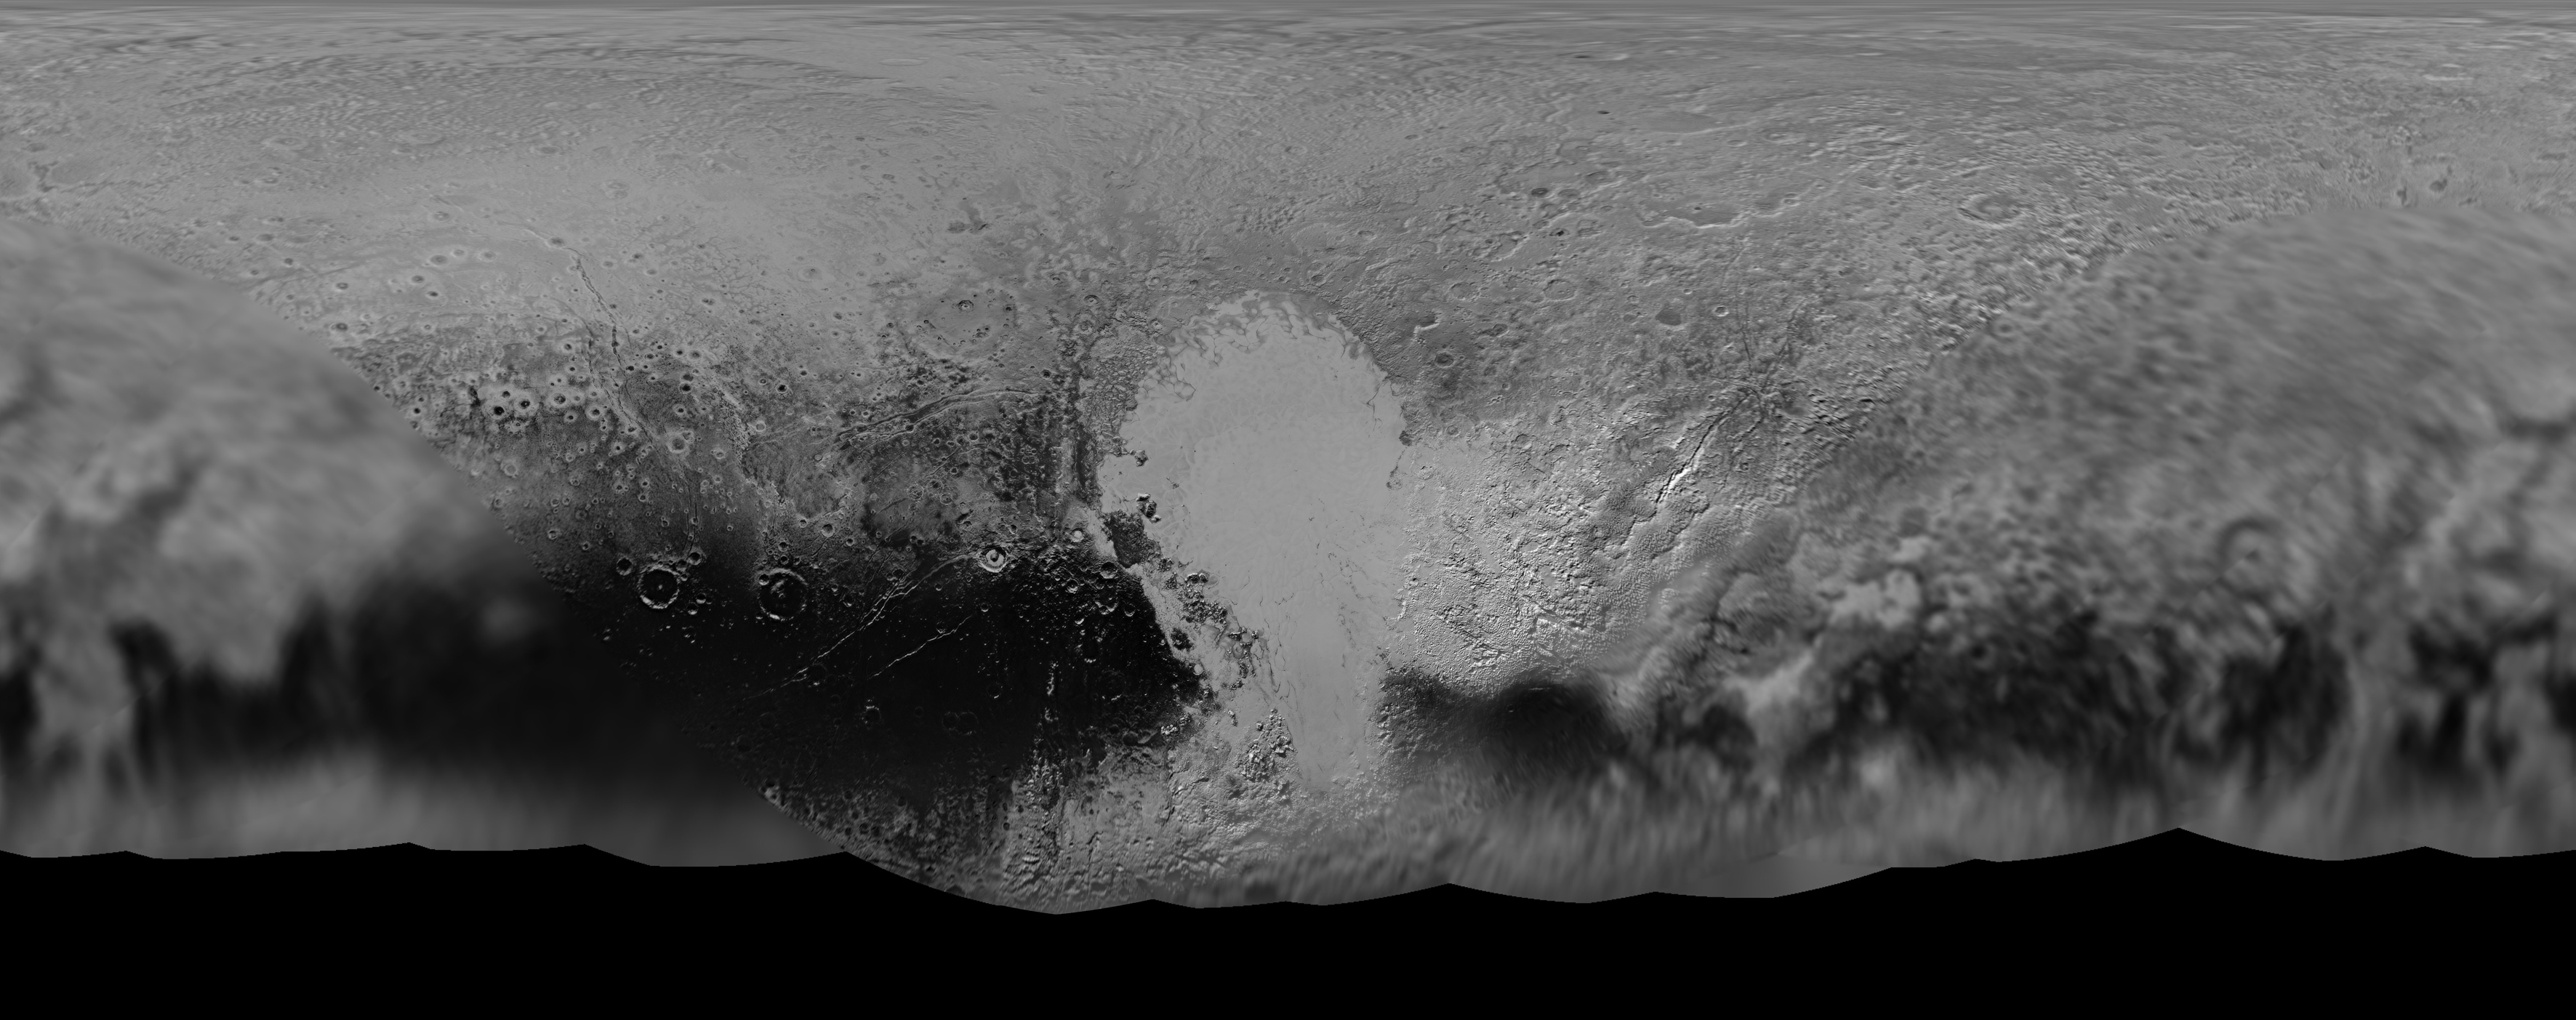 Fig 4 (b): Panchromatic composite global map of Pluto created from images taken at varying distances, and hence, at different resolutions. Sputnik Planum is clearly visible. The dark features along the equatorial region are also clearly resolved. Note that much of the southern hemisphere, currently tilted away from the Sun, is not shown in this map. Credit: NASA/JHUAPL/SwRI